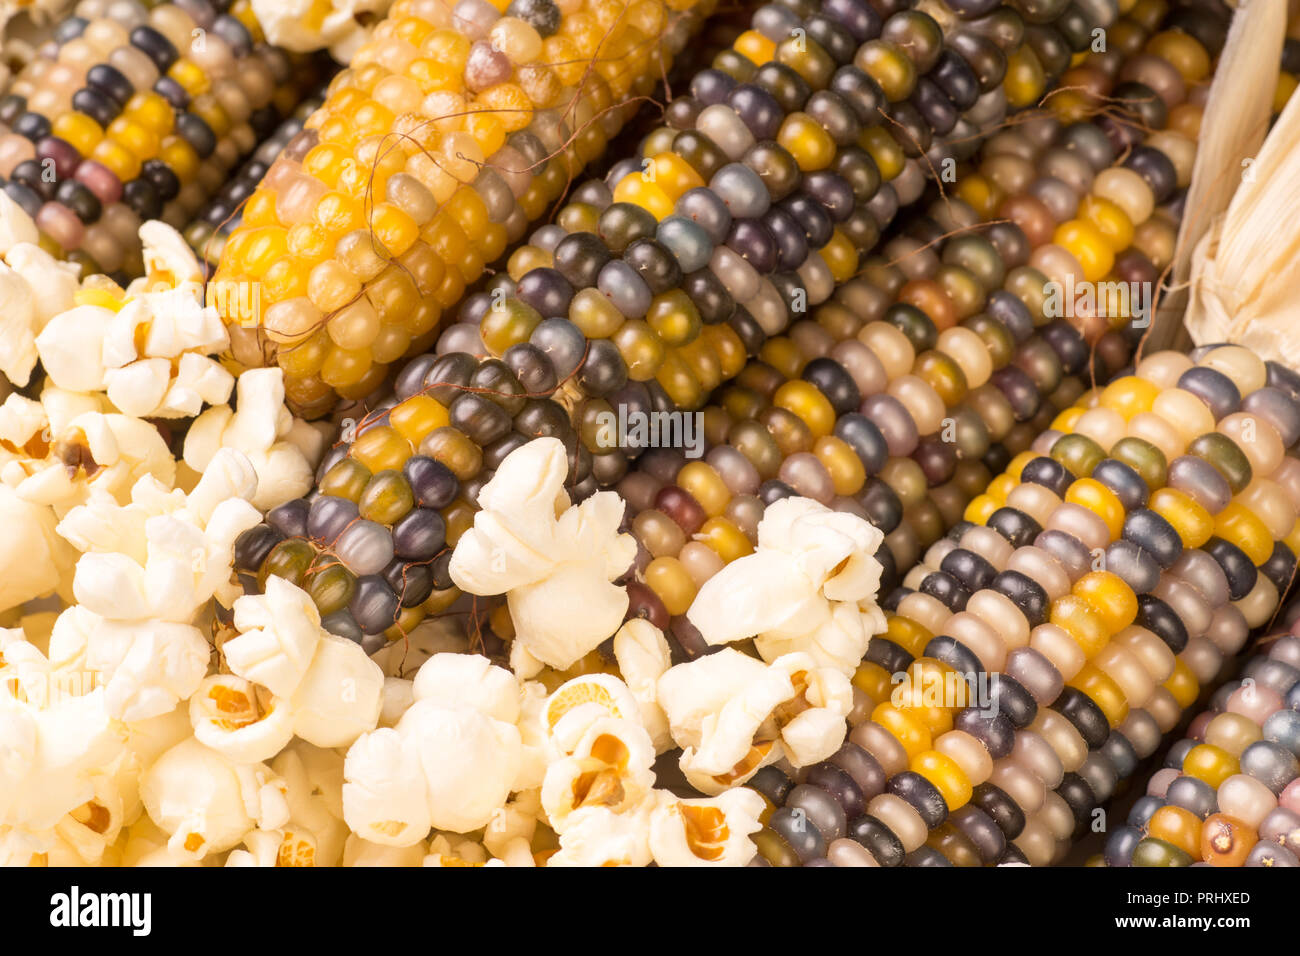 bunch of organic dried multicolored corn on the cob ready to pop popcorn or make grit with already popped popcorn Stock Photo